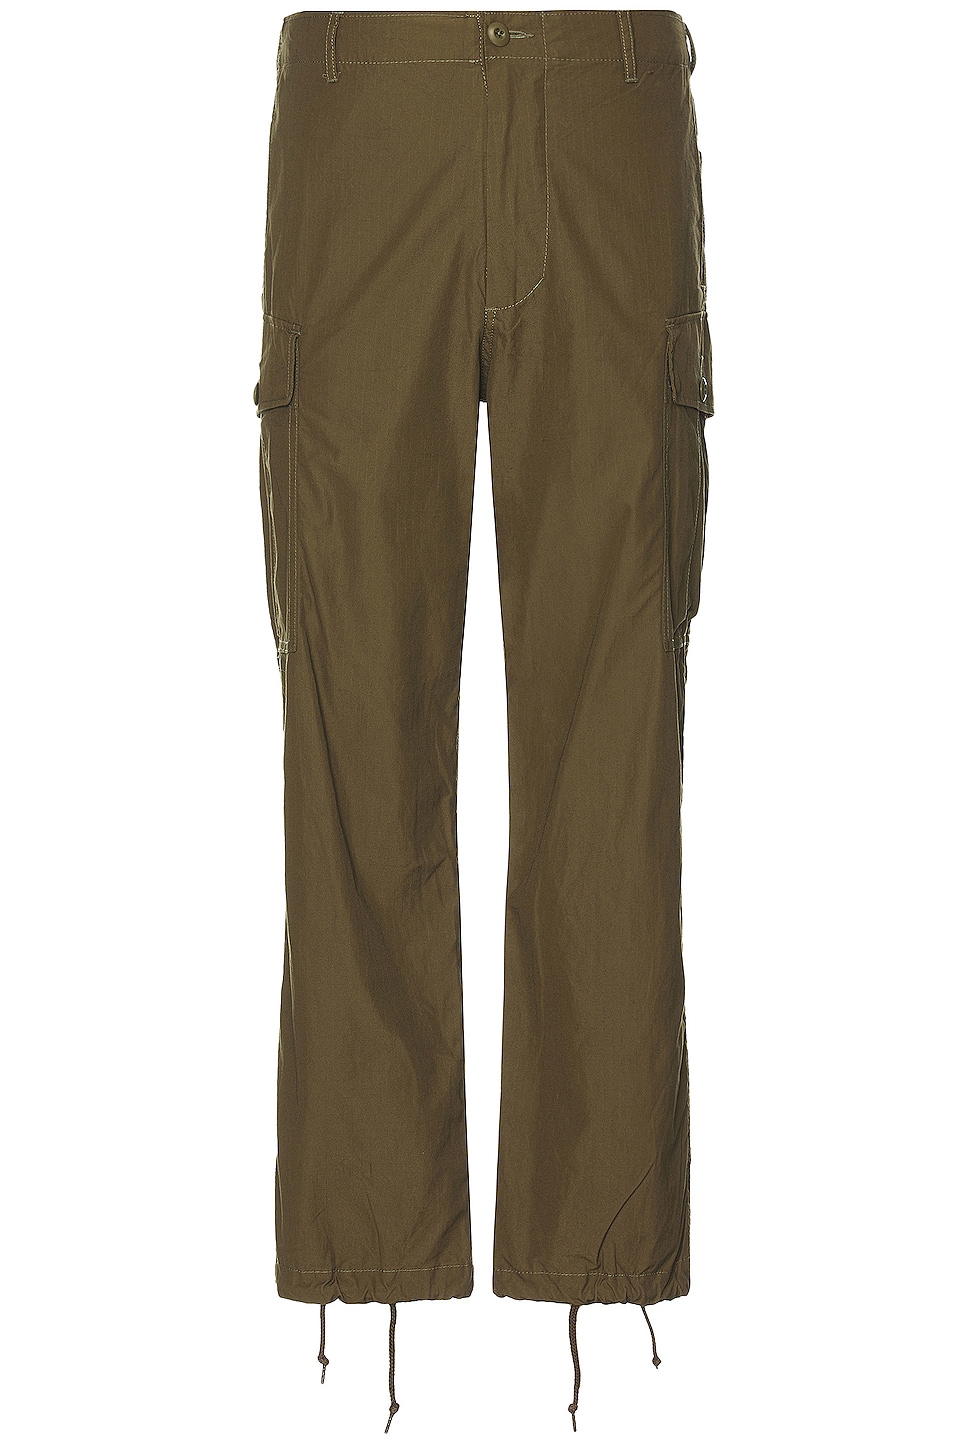 Image 1 of Beams Plus Mil 6 Pockets 80/3 Rip Stop Pant in Olive